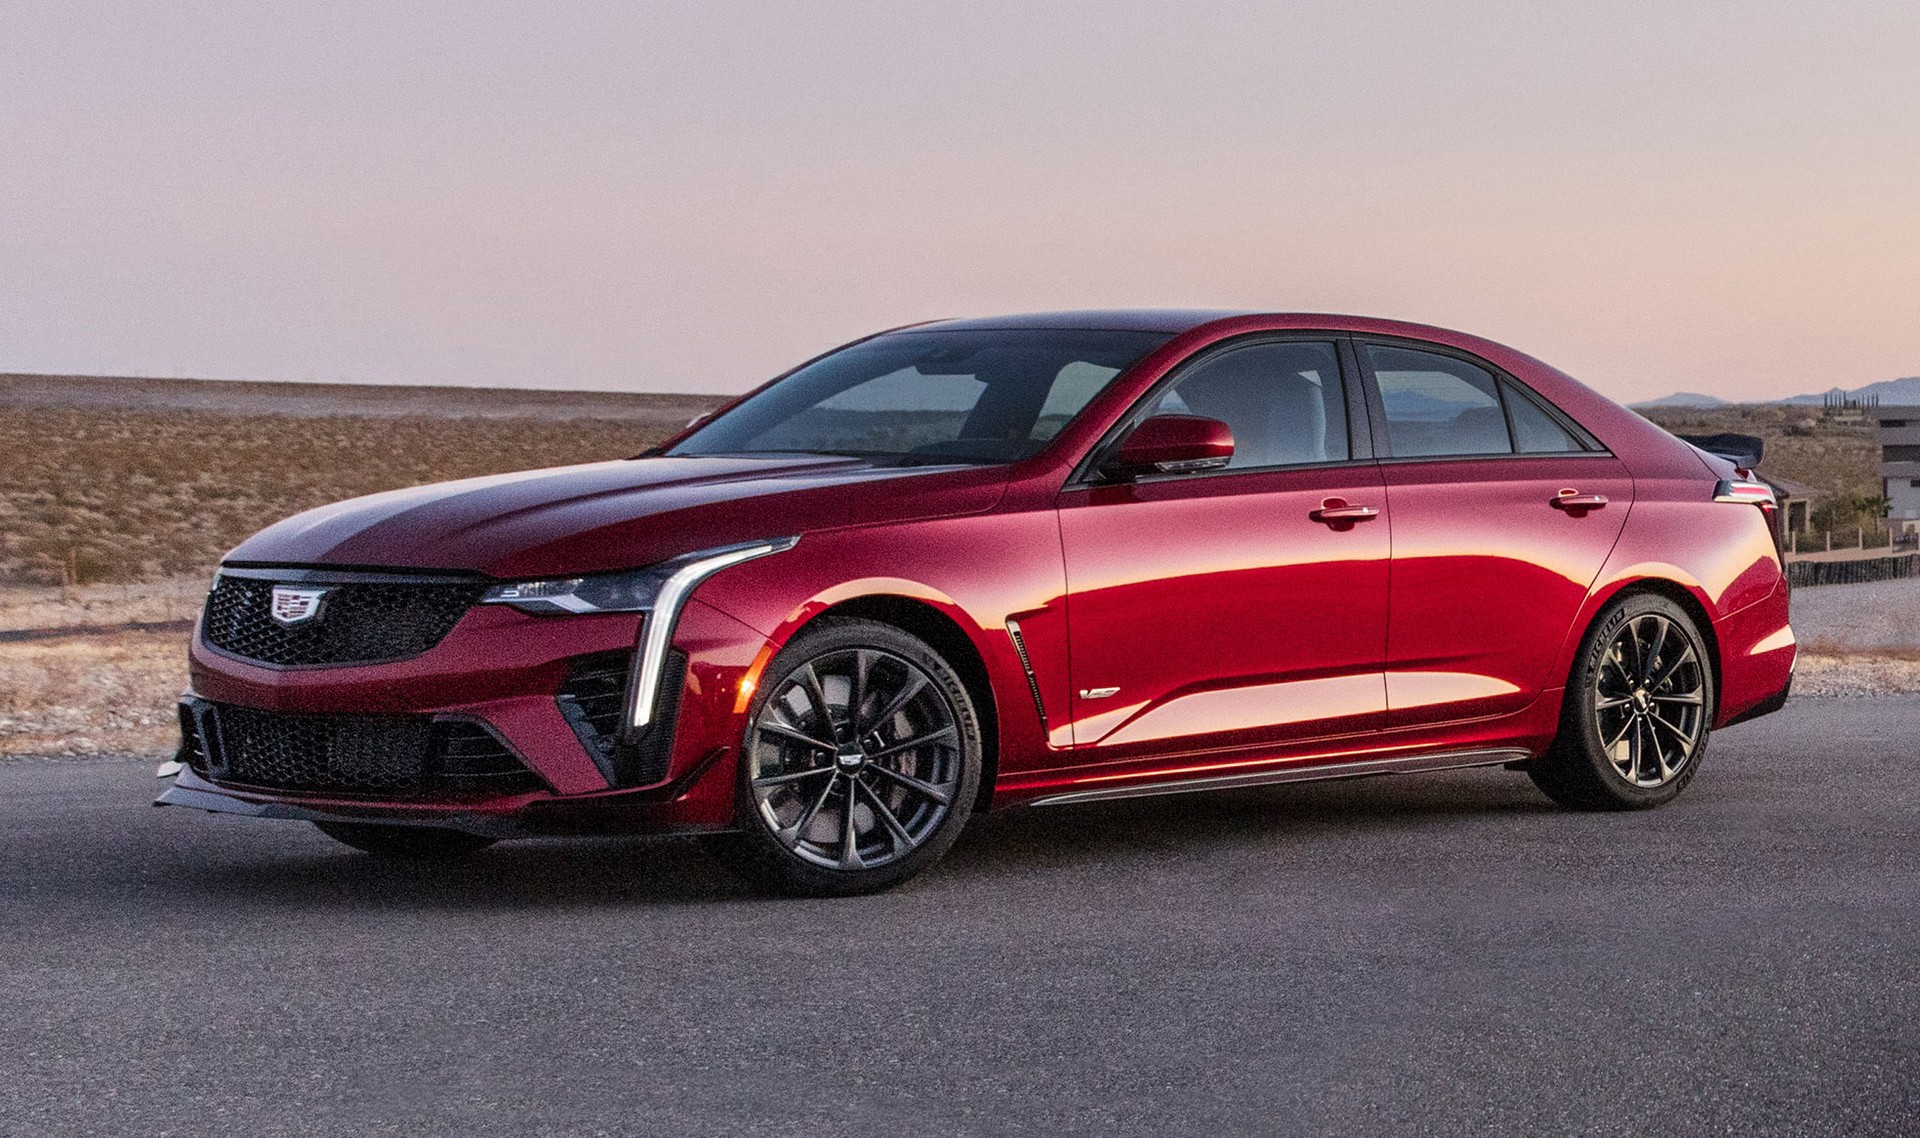 2022 Cadillac CT4V And CT5V Blackwings Shown Ahead Of Their Debut On